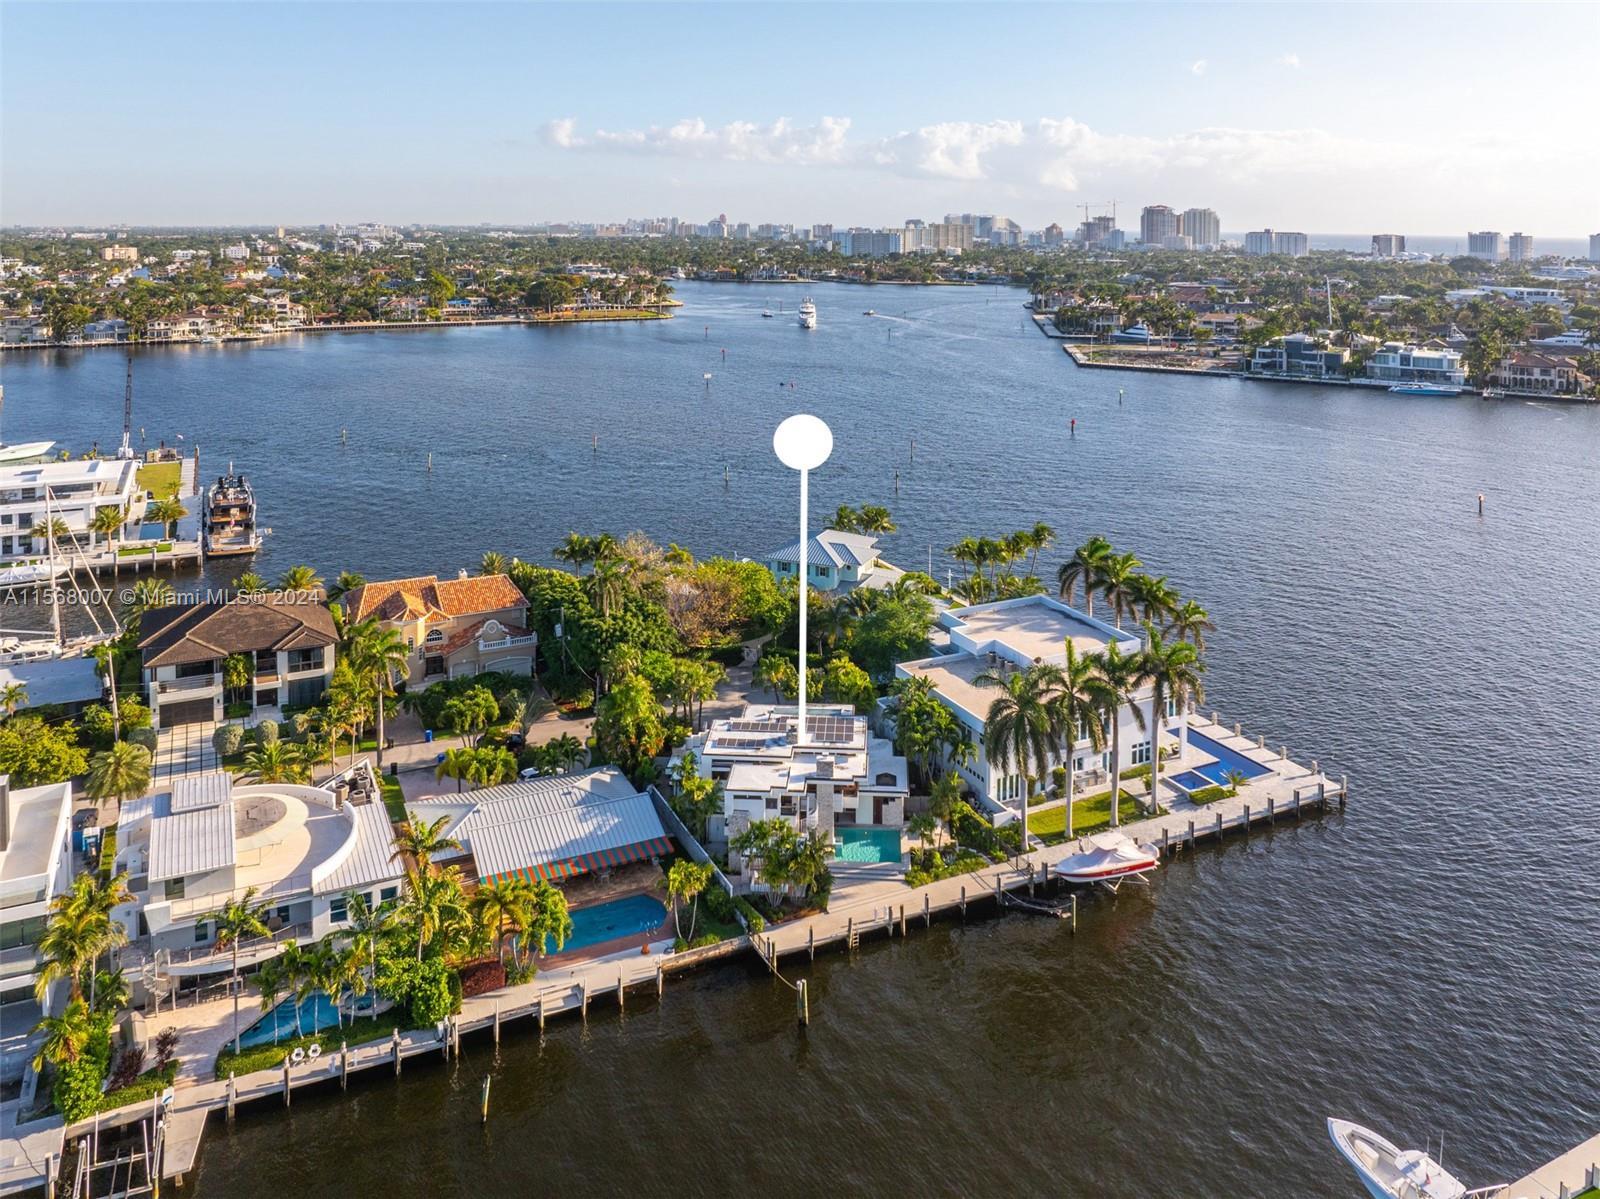 Impeccably located within Fort Lauderdale’s famous waterfront neighborhood, Lauderdale Harbors. Minu